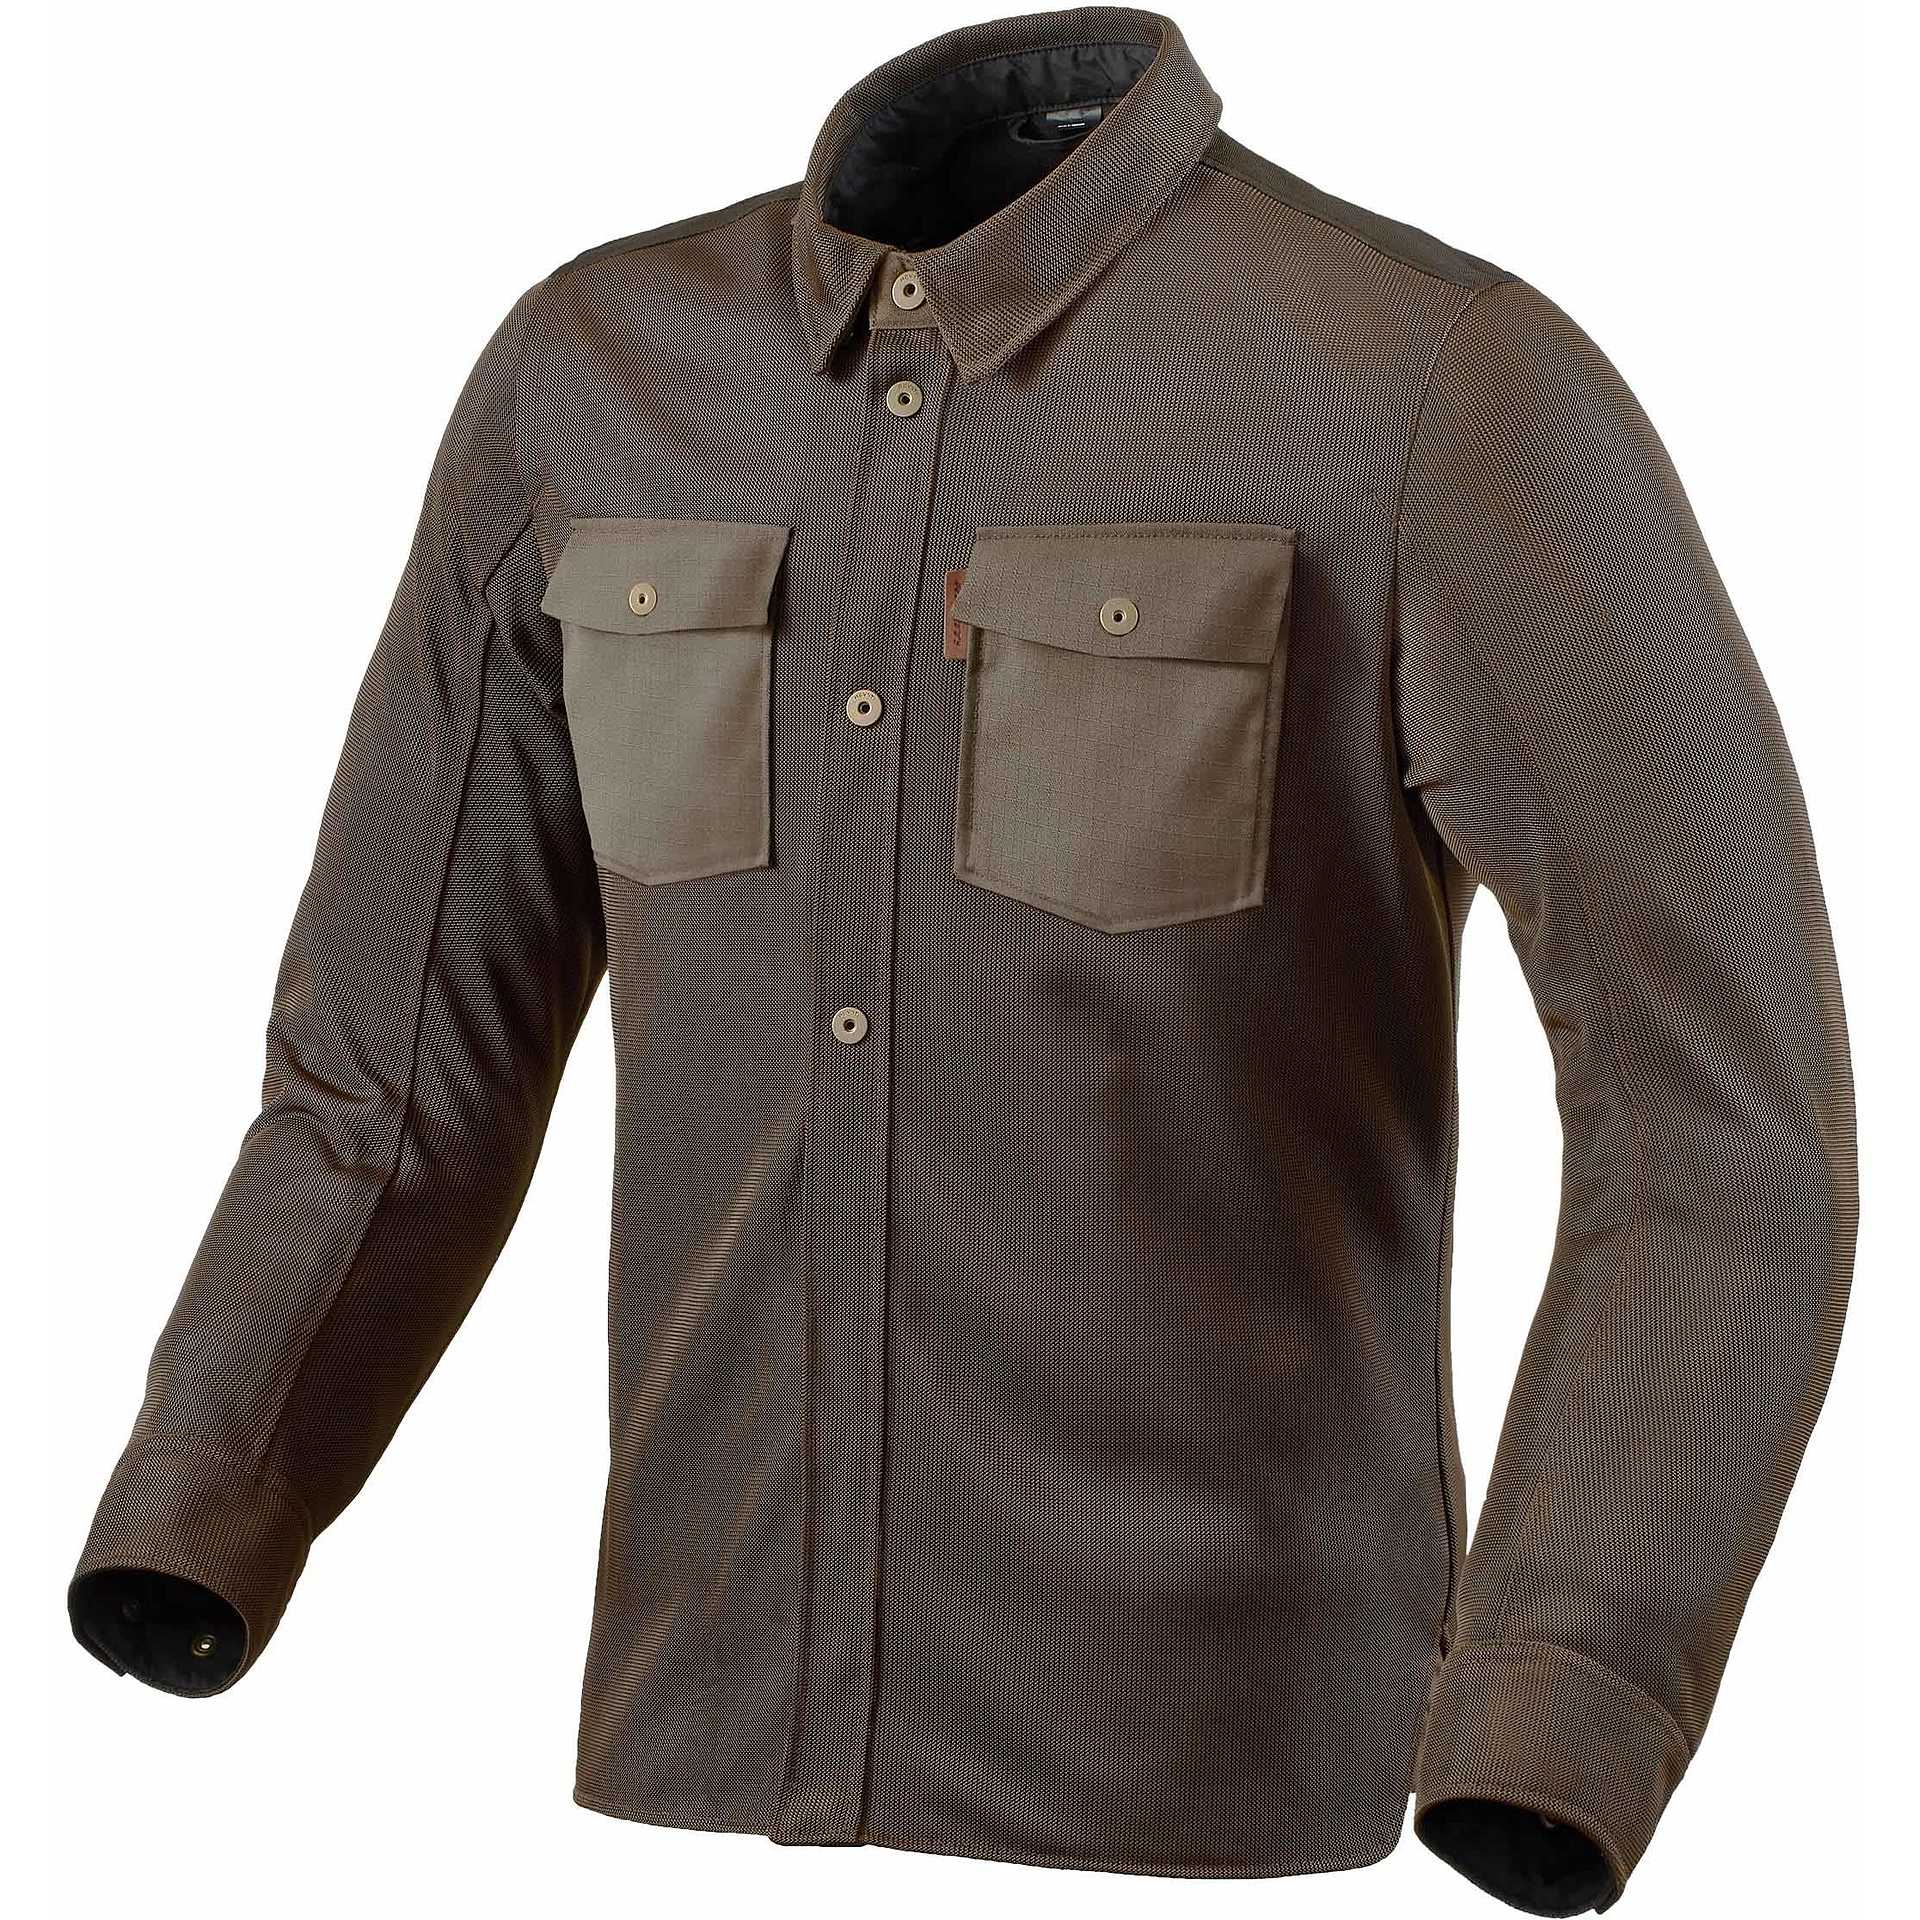 Image of REV'IT! Overshirt Tracer Air 2 Jacket Brown Size L ID 8700001317115